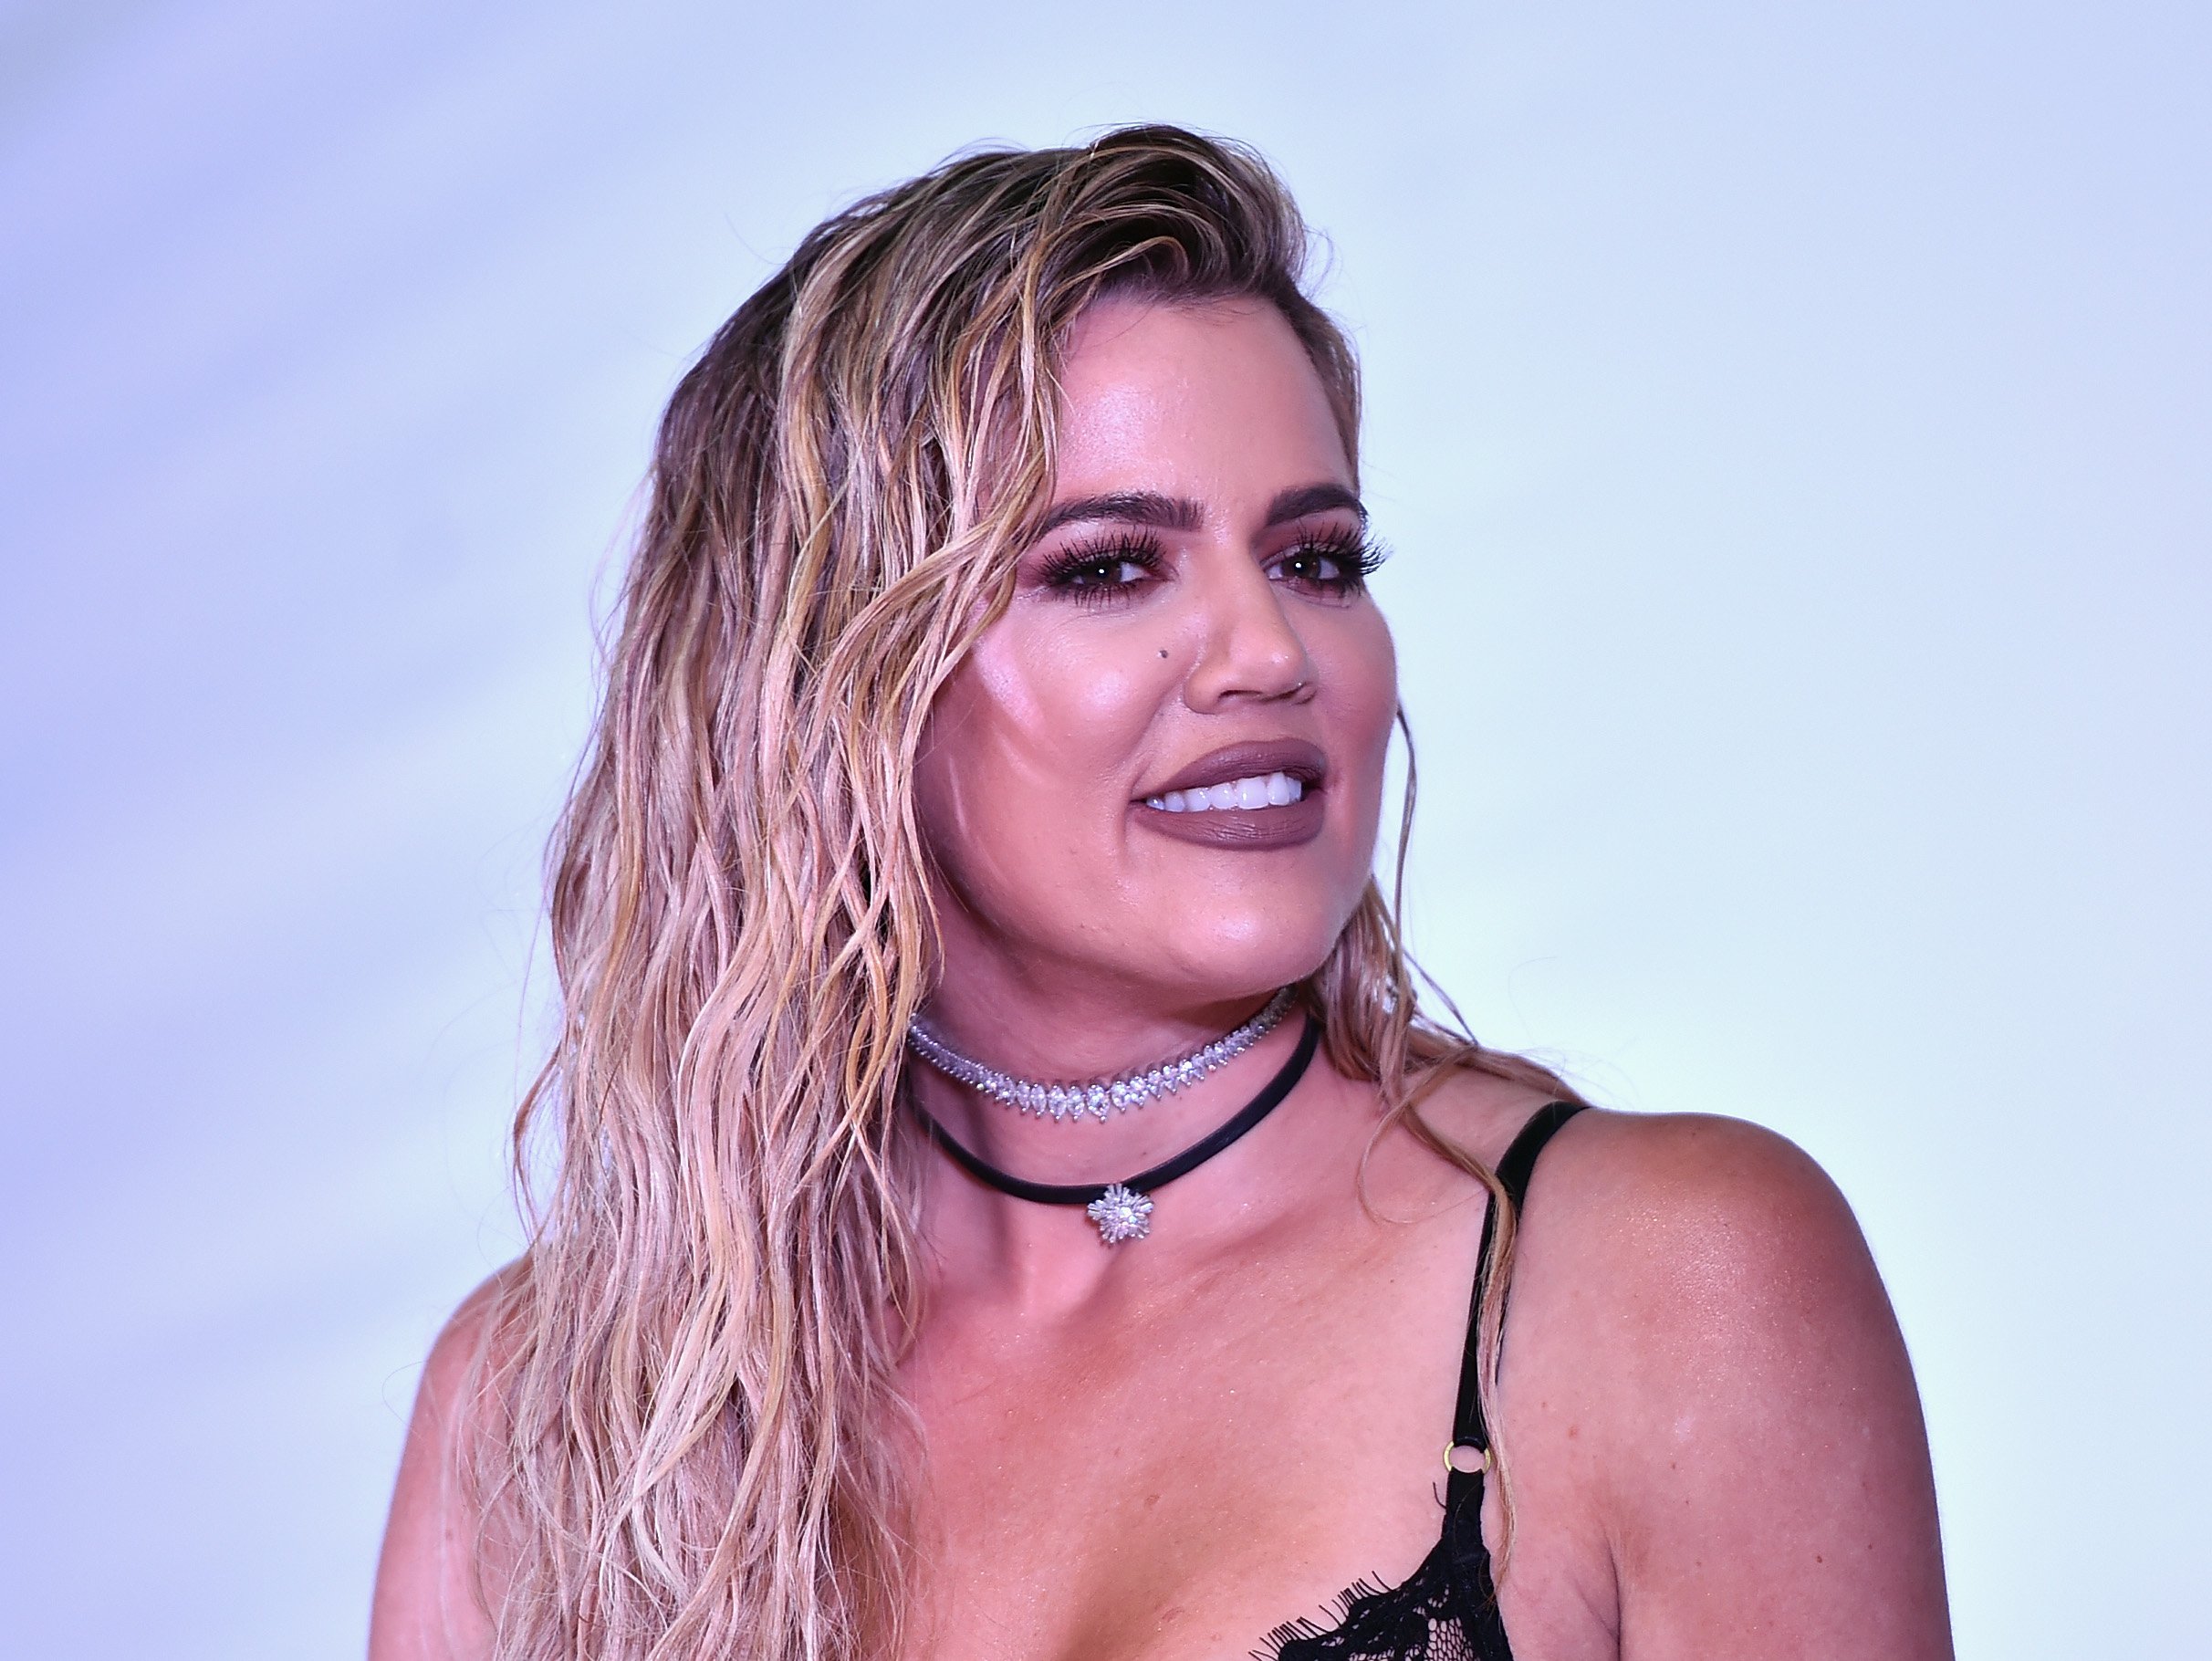 Khloé Kardashian at the launch event for Good American at Nordstrom at the Grove on October 18, 2016 in Los Angeles, California. |Source: Getty Images